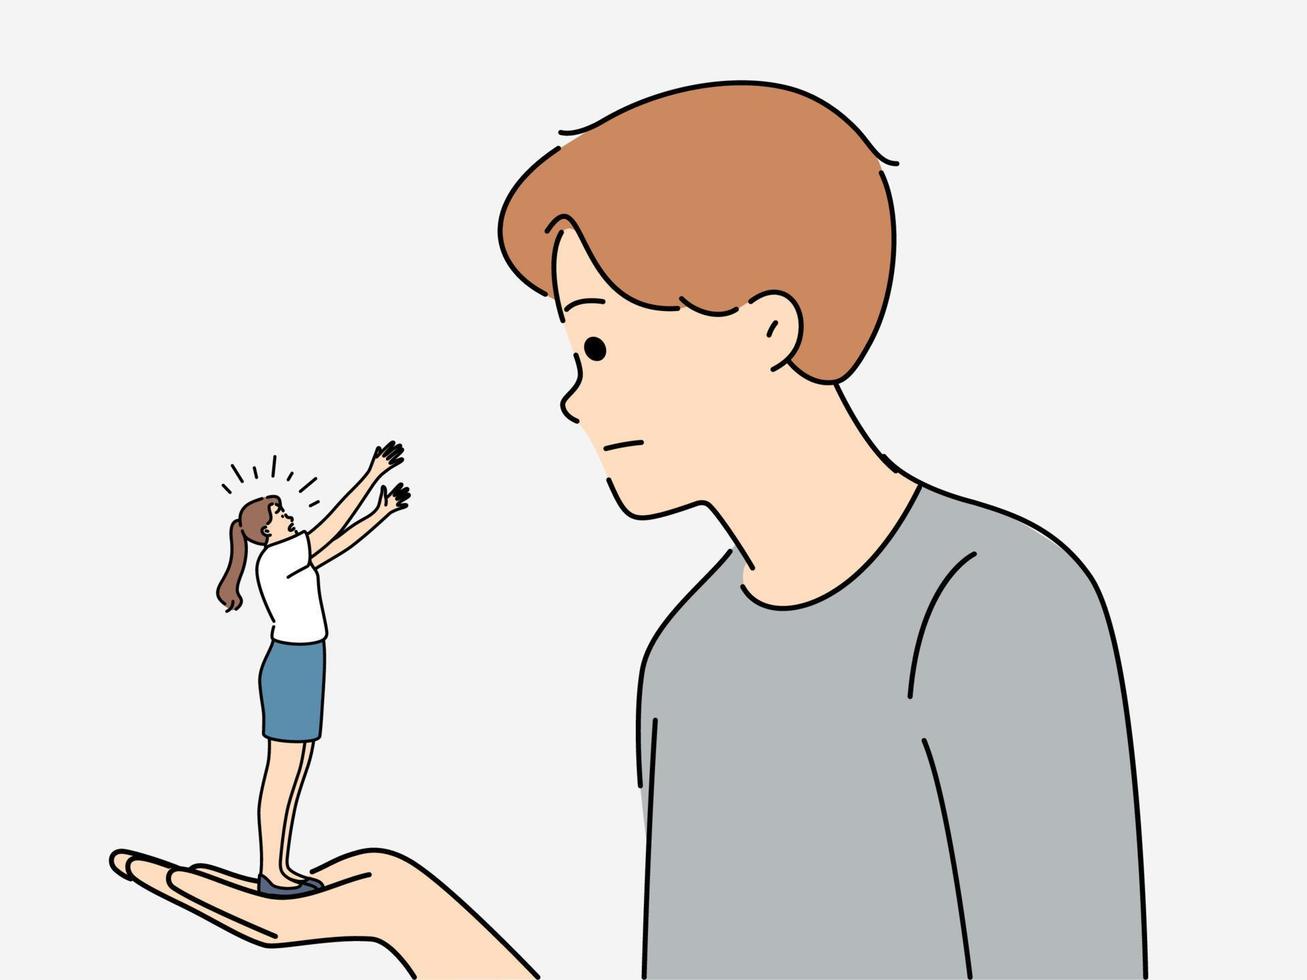 Young man holding on palm tiny woman figure asking for hug or comfort. Desperate girl beg for love and affection. Relationship concept. Vector illustration.